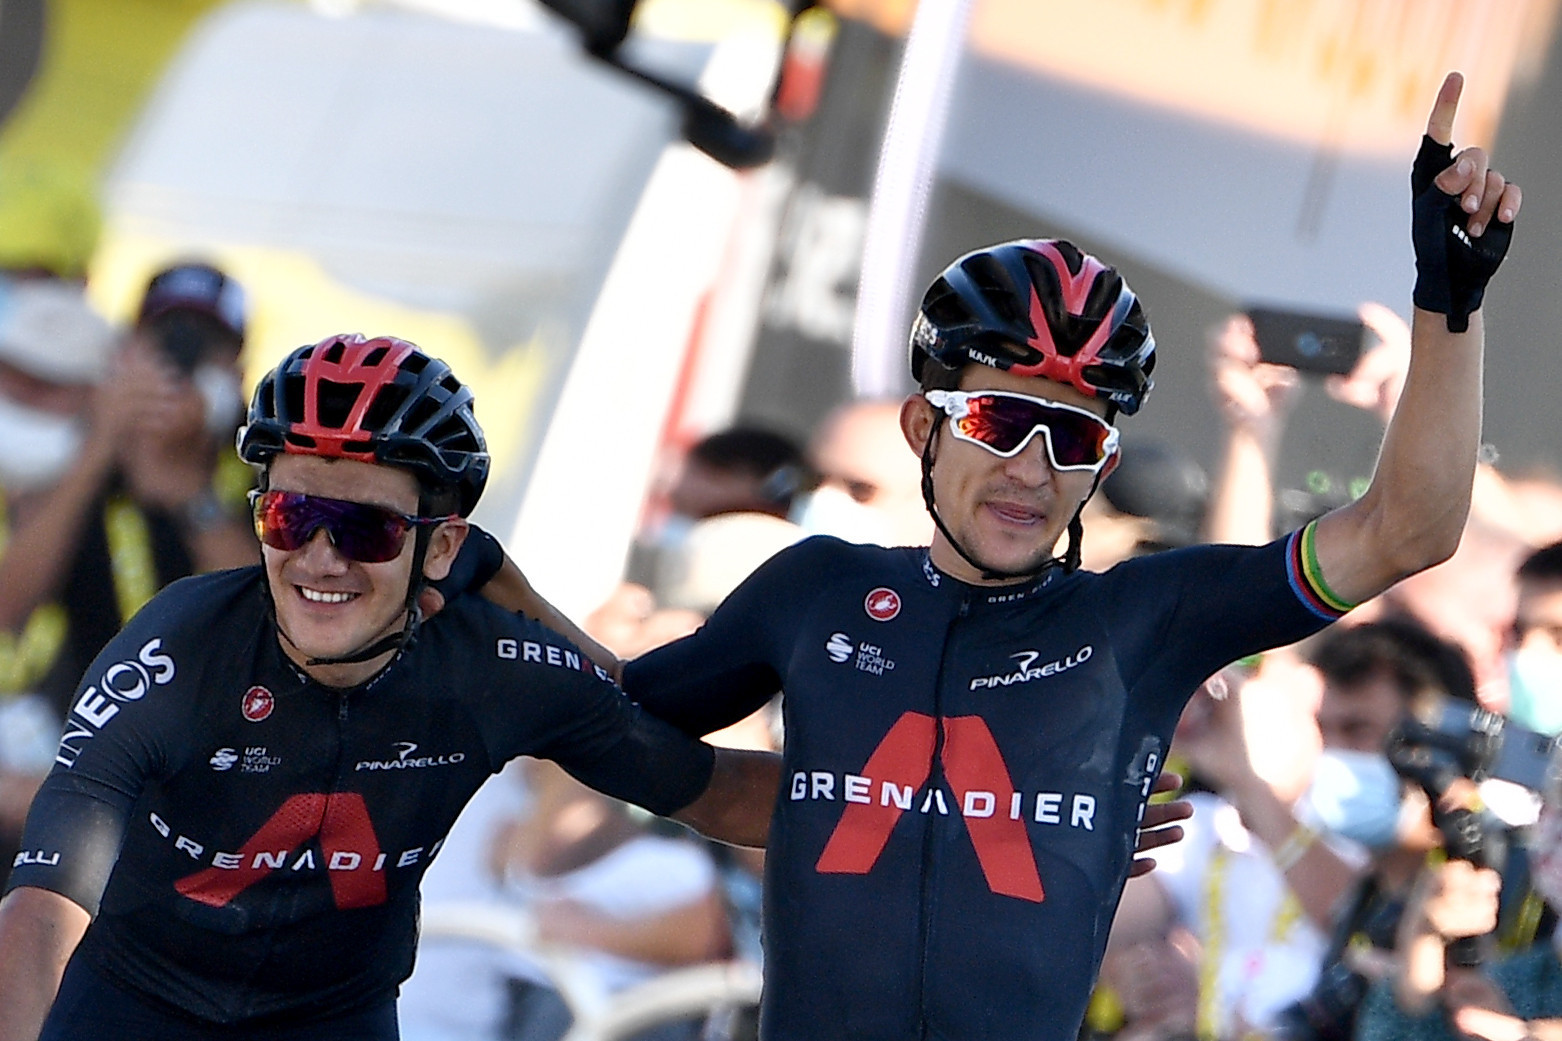 Ineos Grenadiers duo earn stage 18 win and mountains jersey